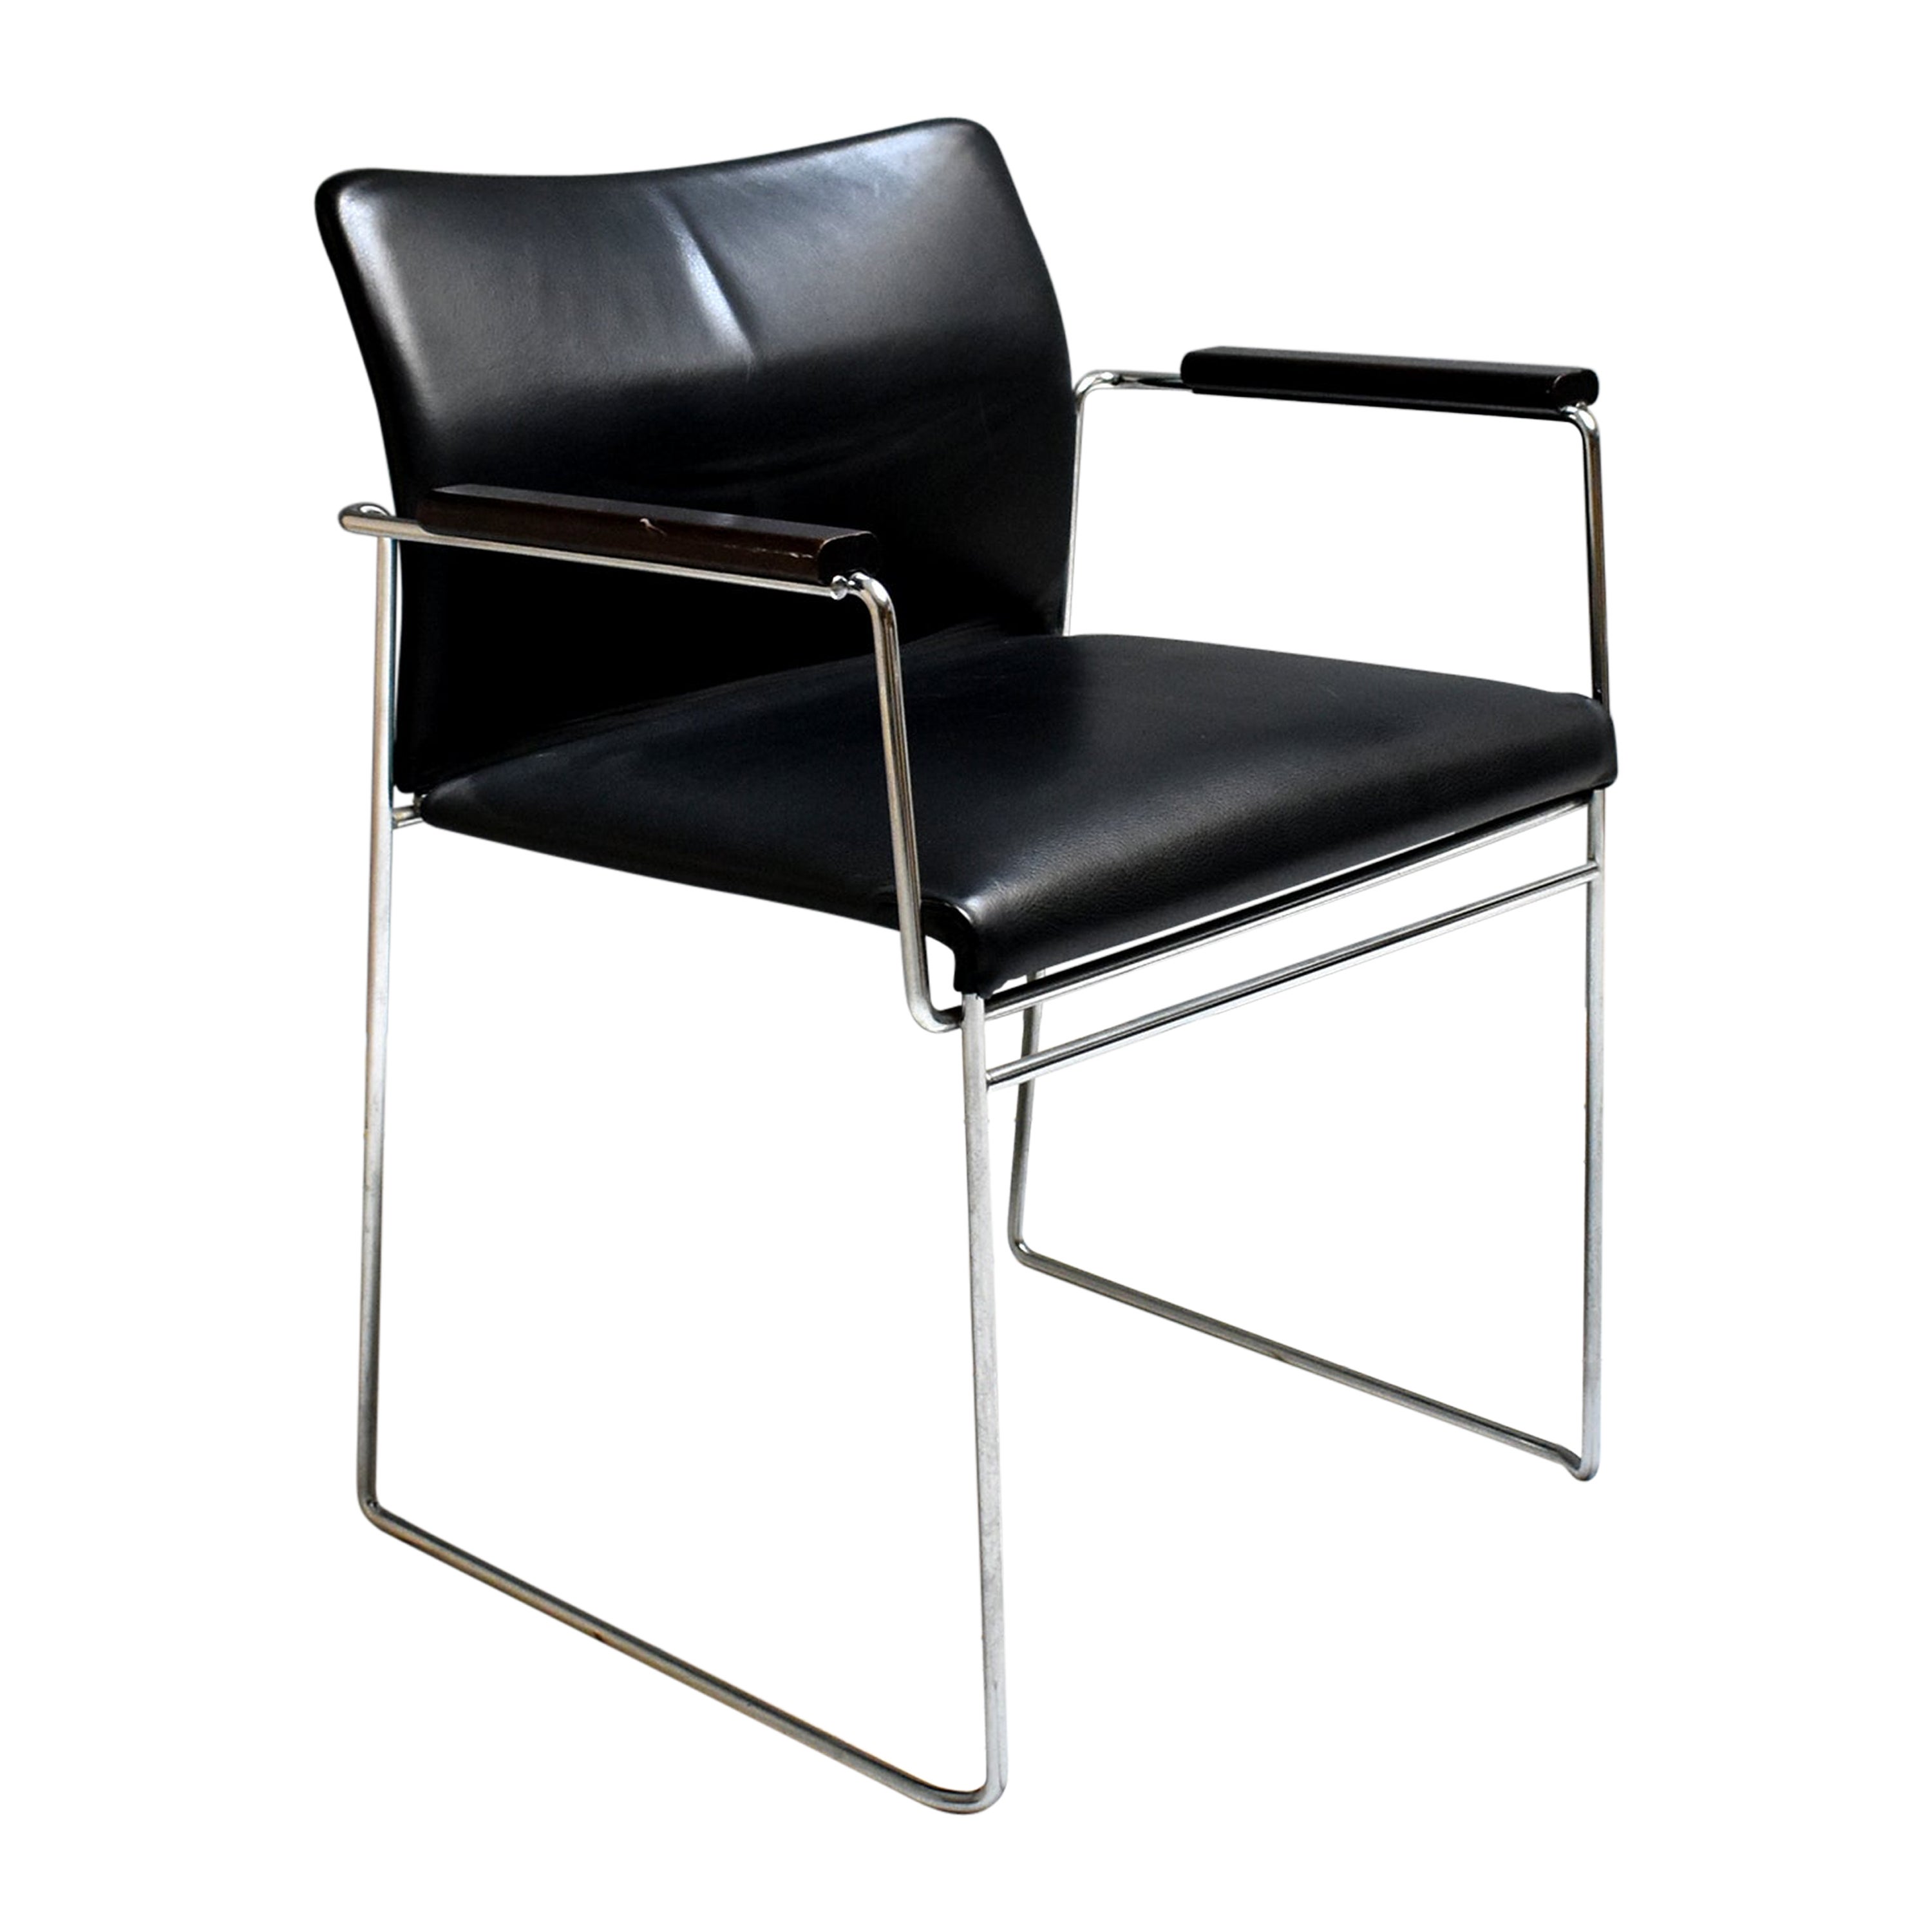 1970s, Ten vintage Jano armchairs designed by Kazuhide for Simon Gavina.
Featuring original upholstery on chrome steel frame. 
The structure is in bent metal rod, induction electro-welded and chromed. They are completely removable, covered in black